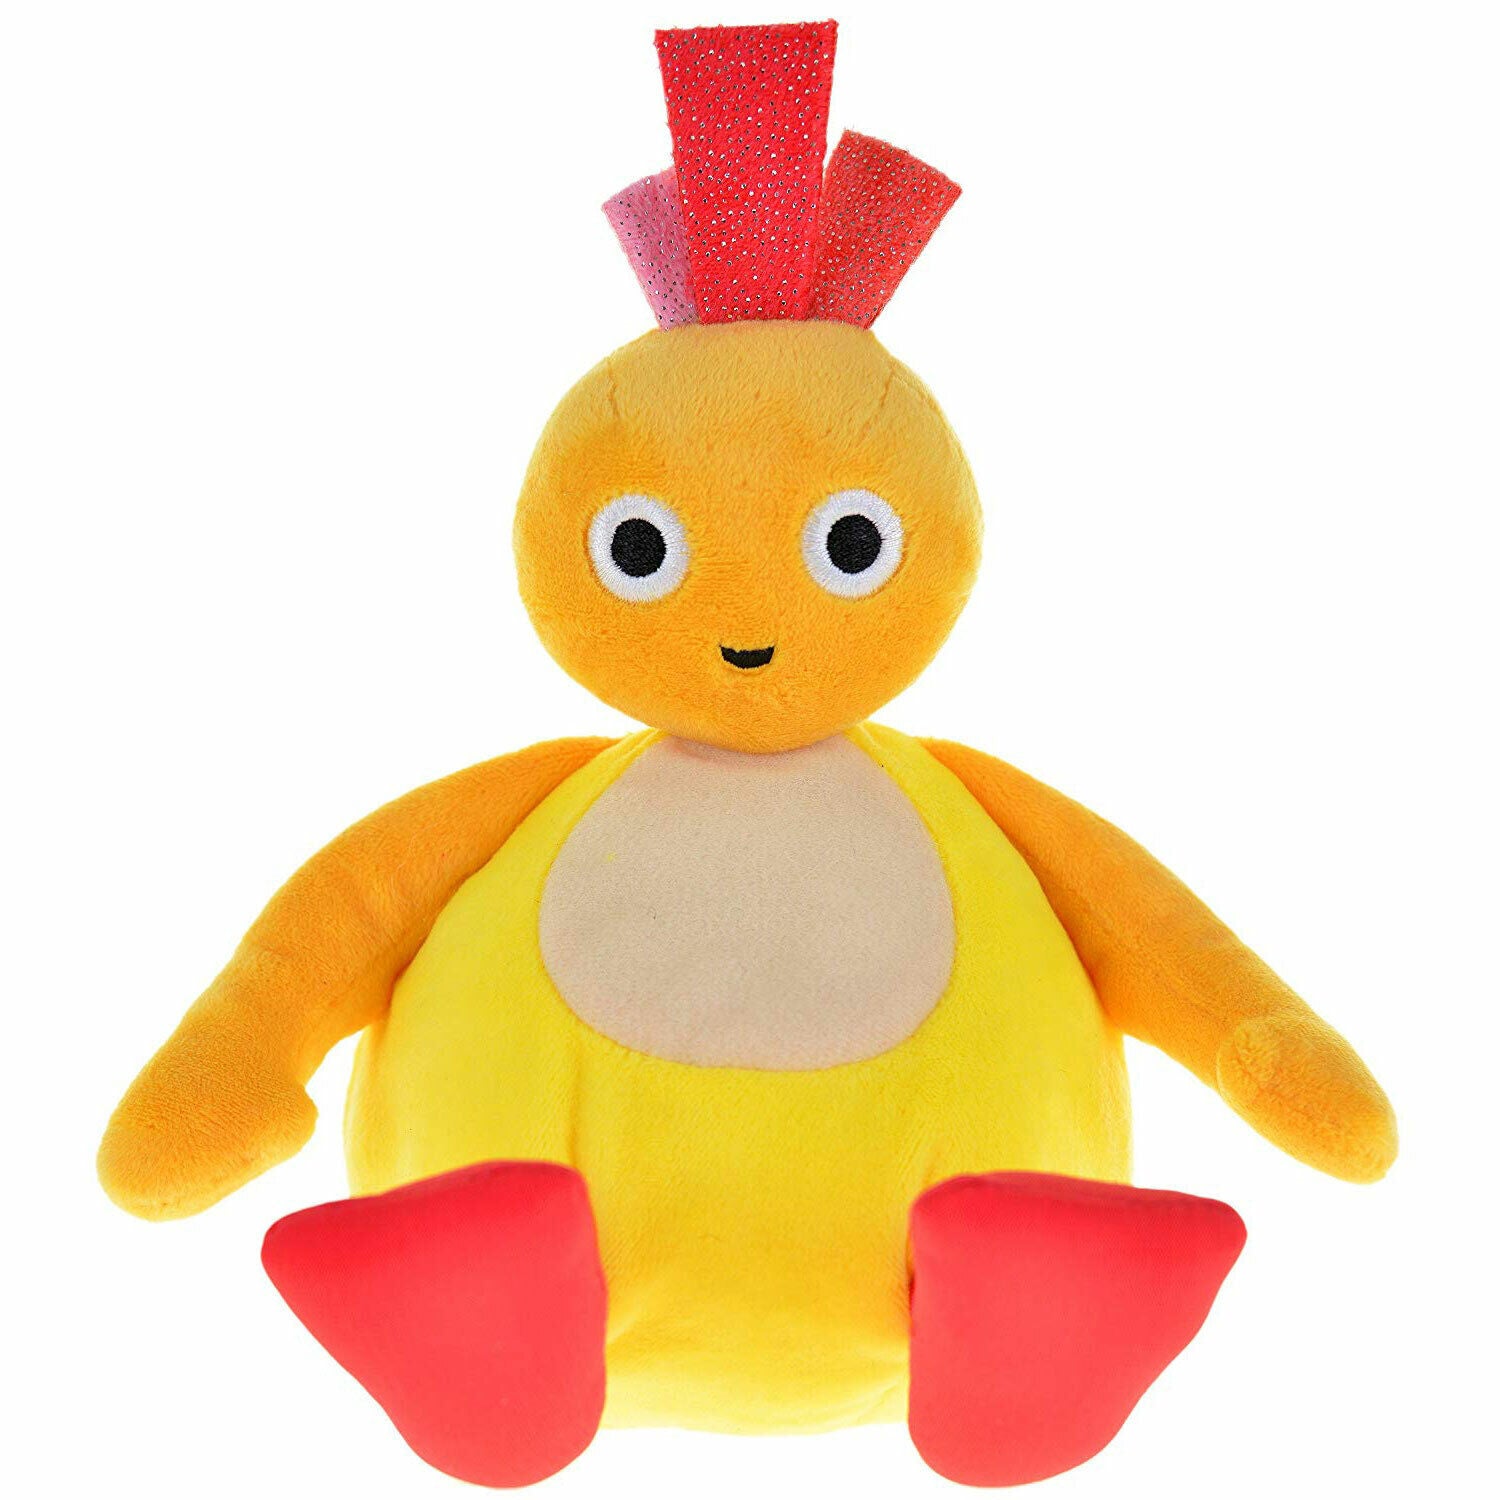 New Twirlywoos Chatty Chickedy Soft Toy - Perfect for Kids!